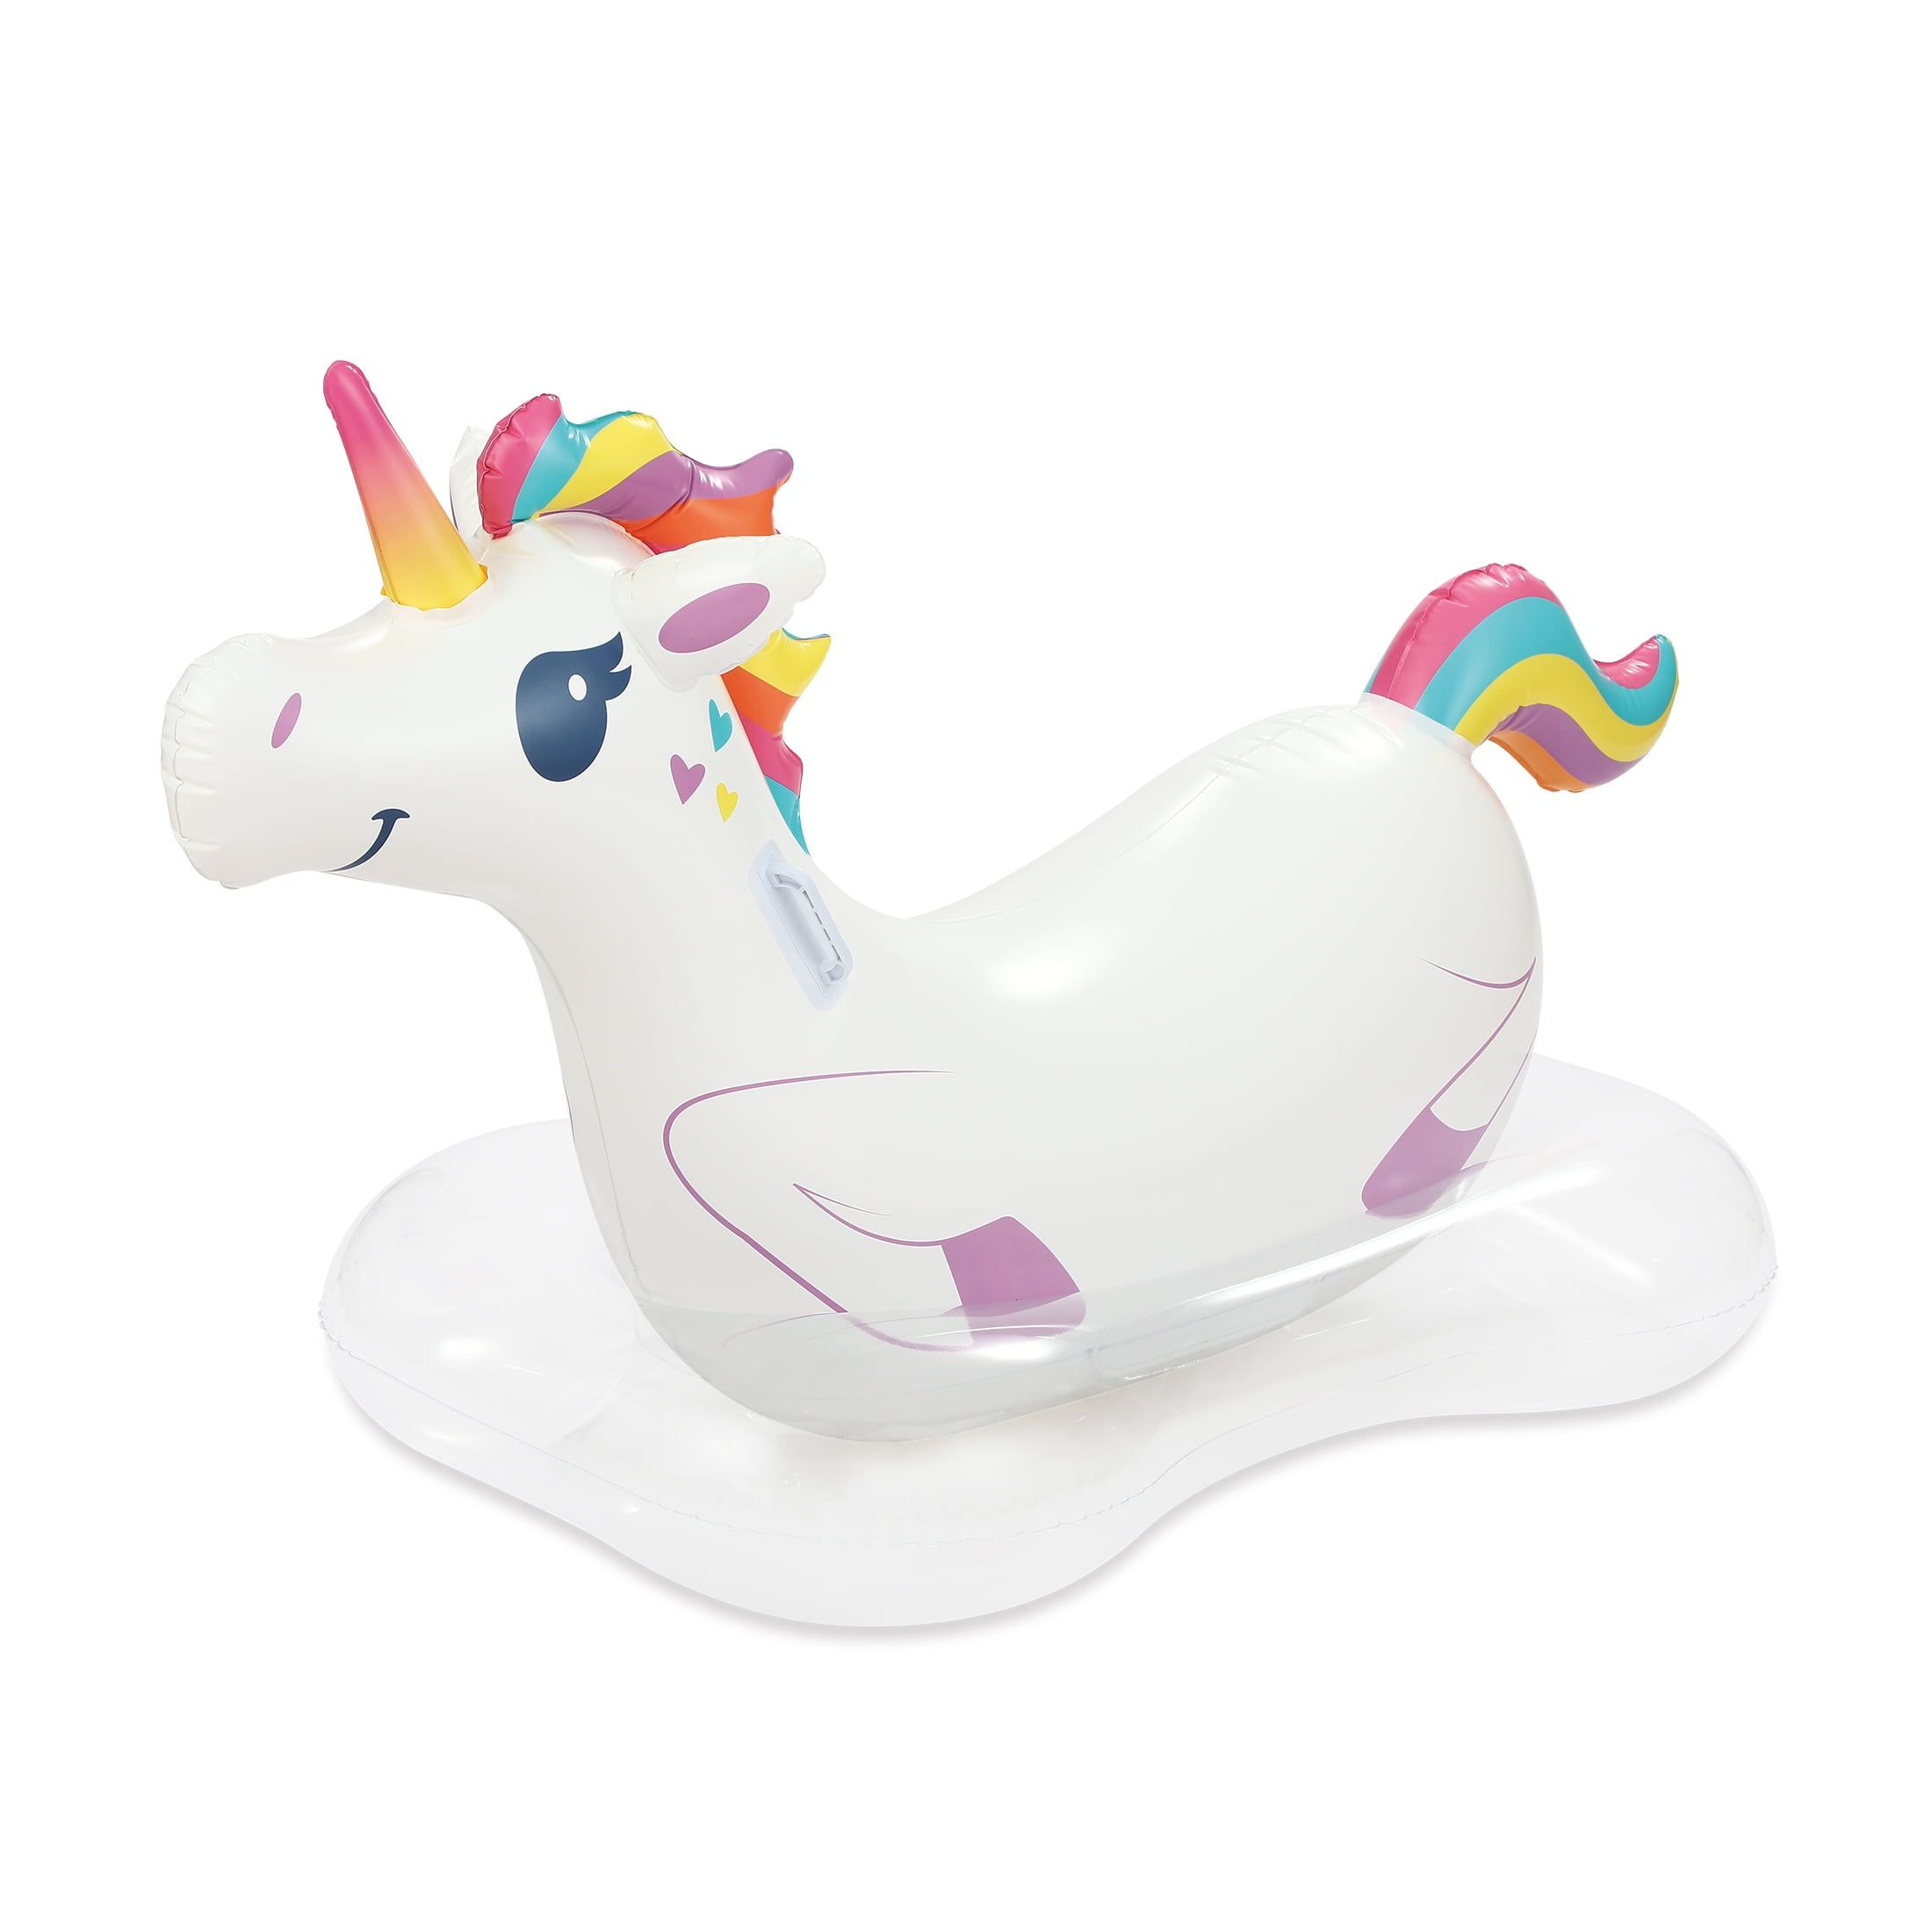 NEW INFLATABLE DRINK FLOATIE UNICORN or RAINBOW YOUR CHOICE 